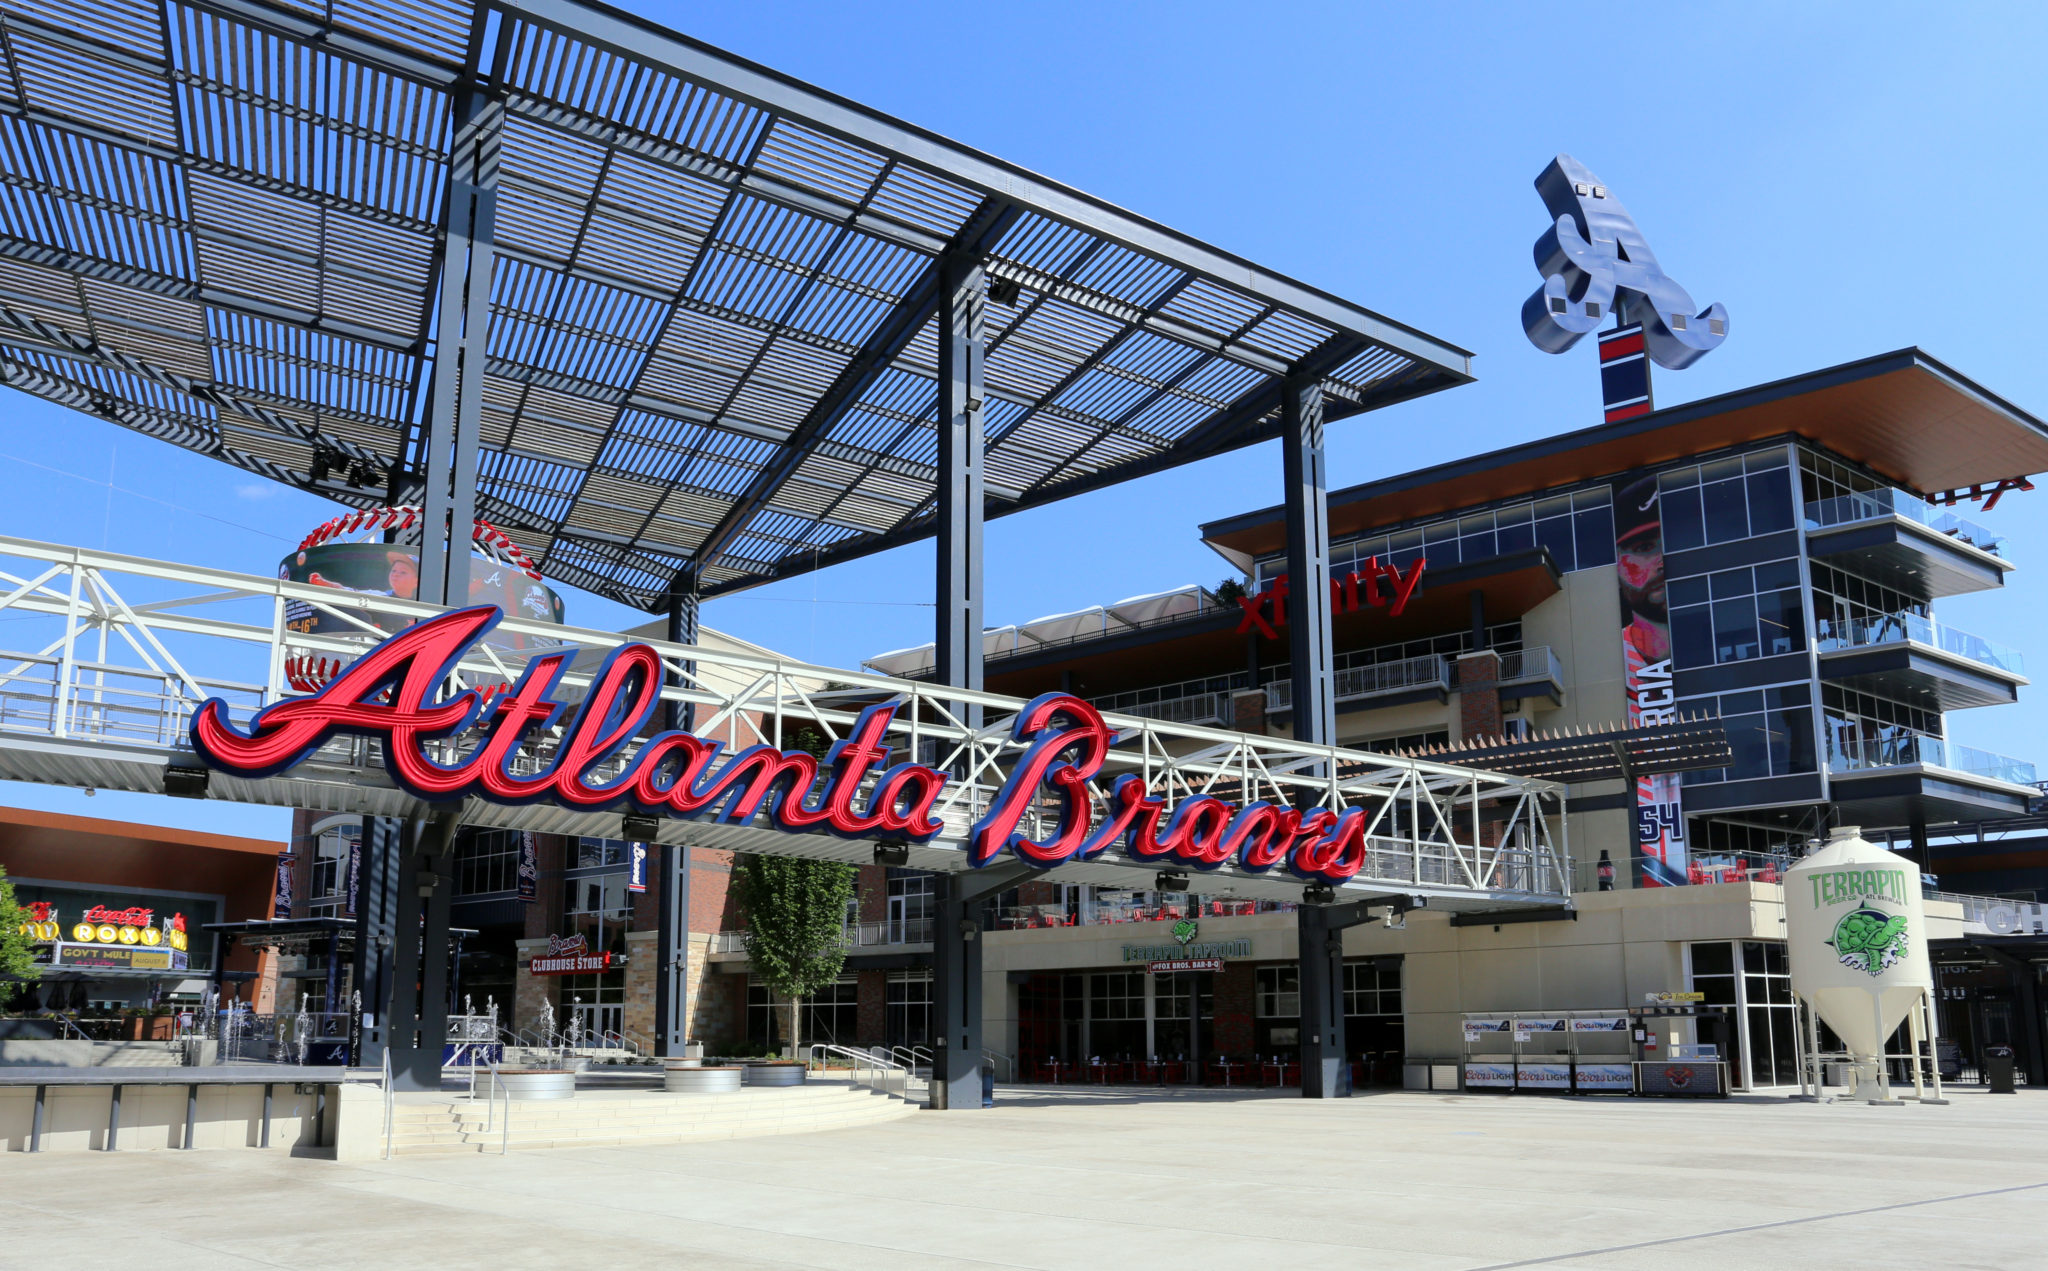 What to Expect When You Attend an Atlanta Braves Game